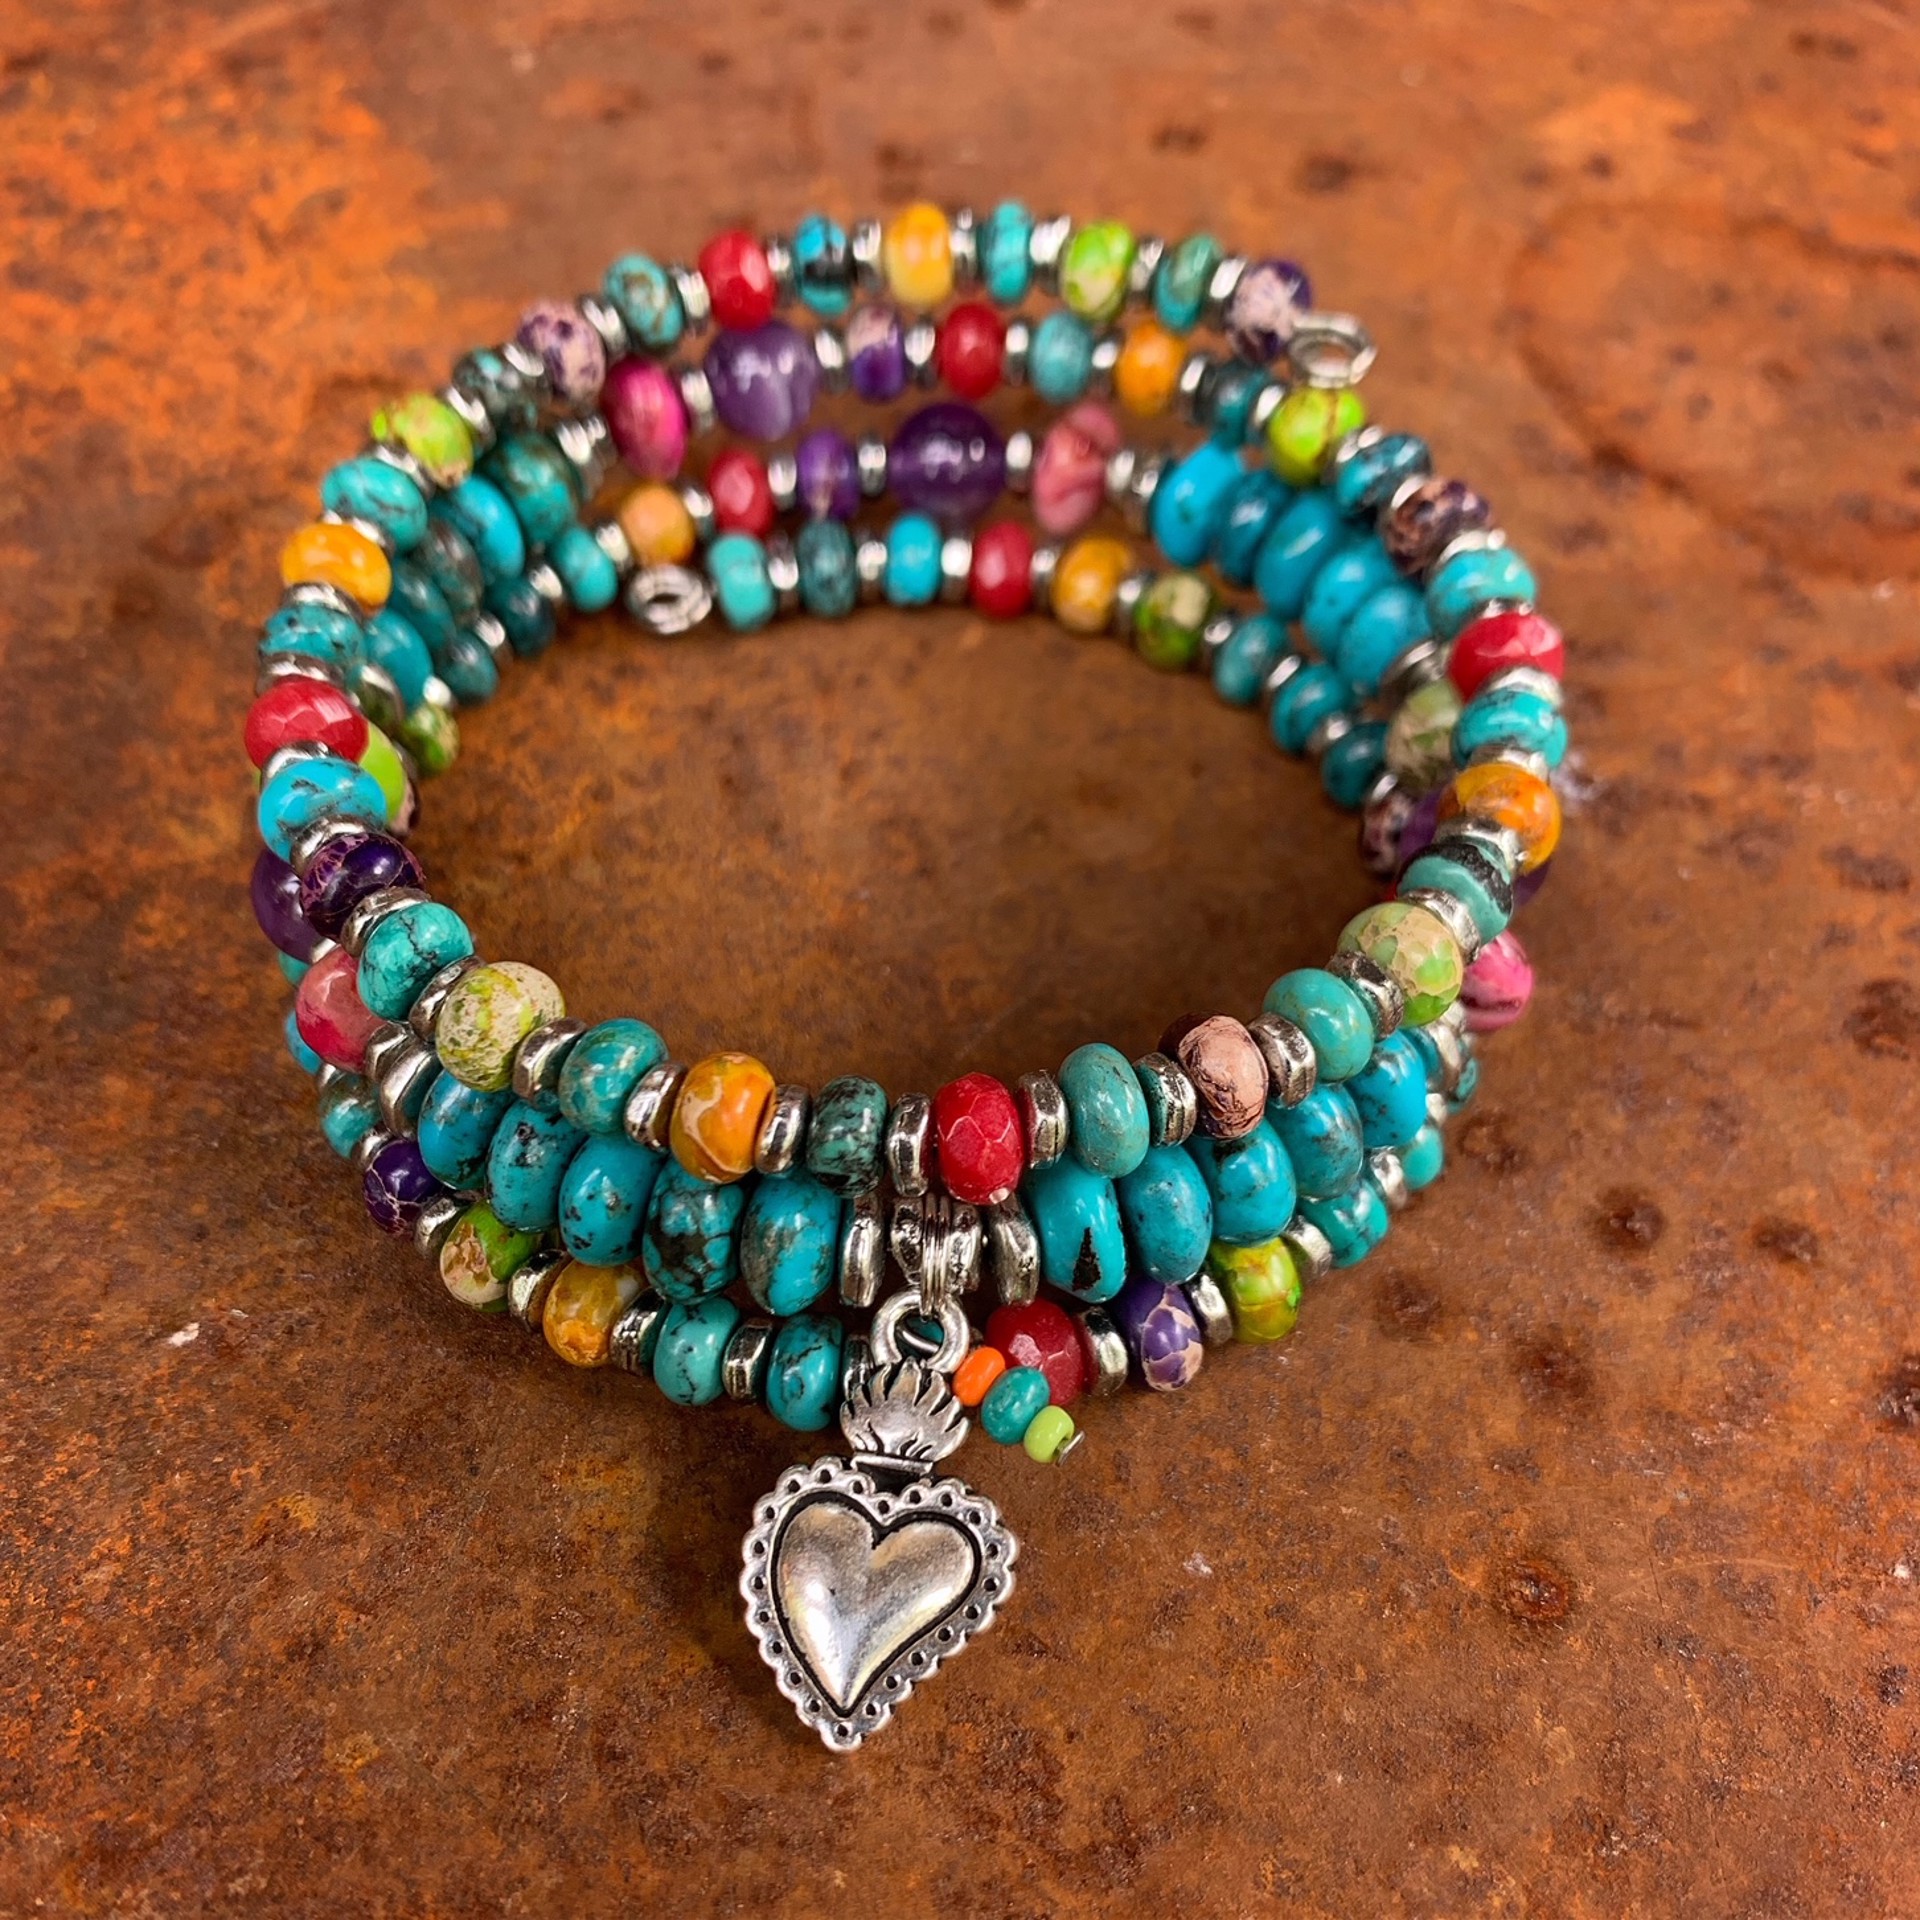 K842 Turquoise and Jasper Sacred Heart Charm Bracelet by Kelly Ormsby